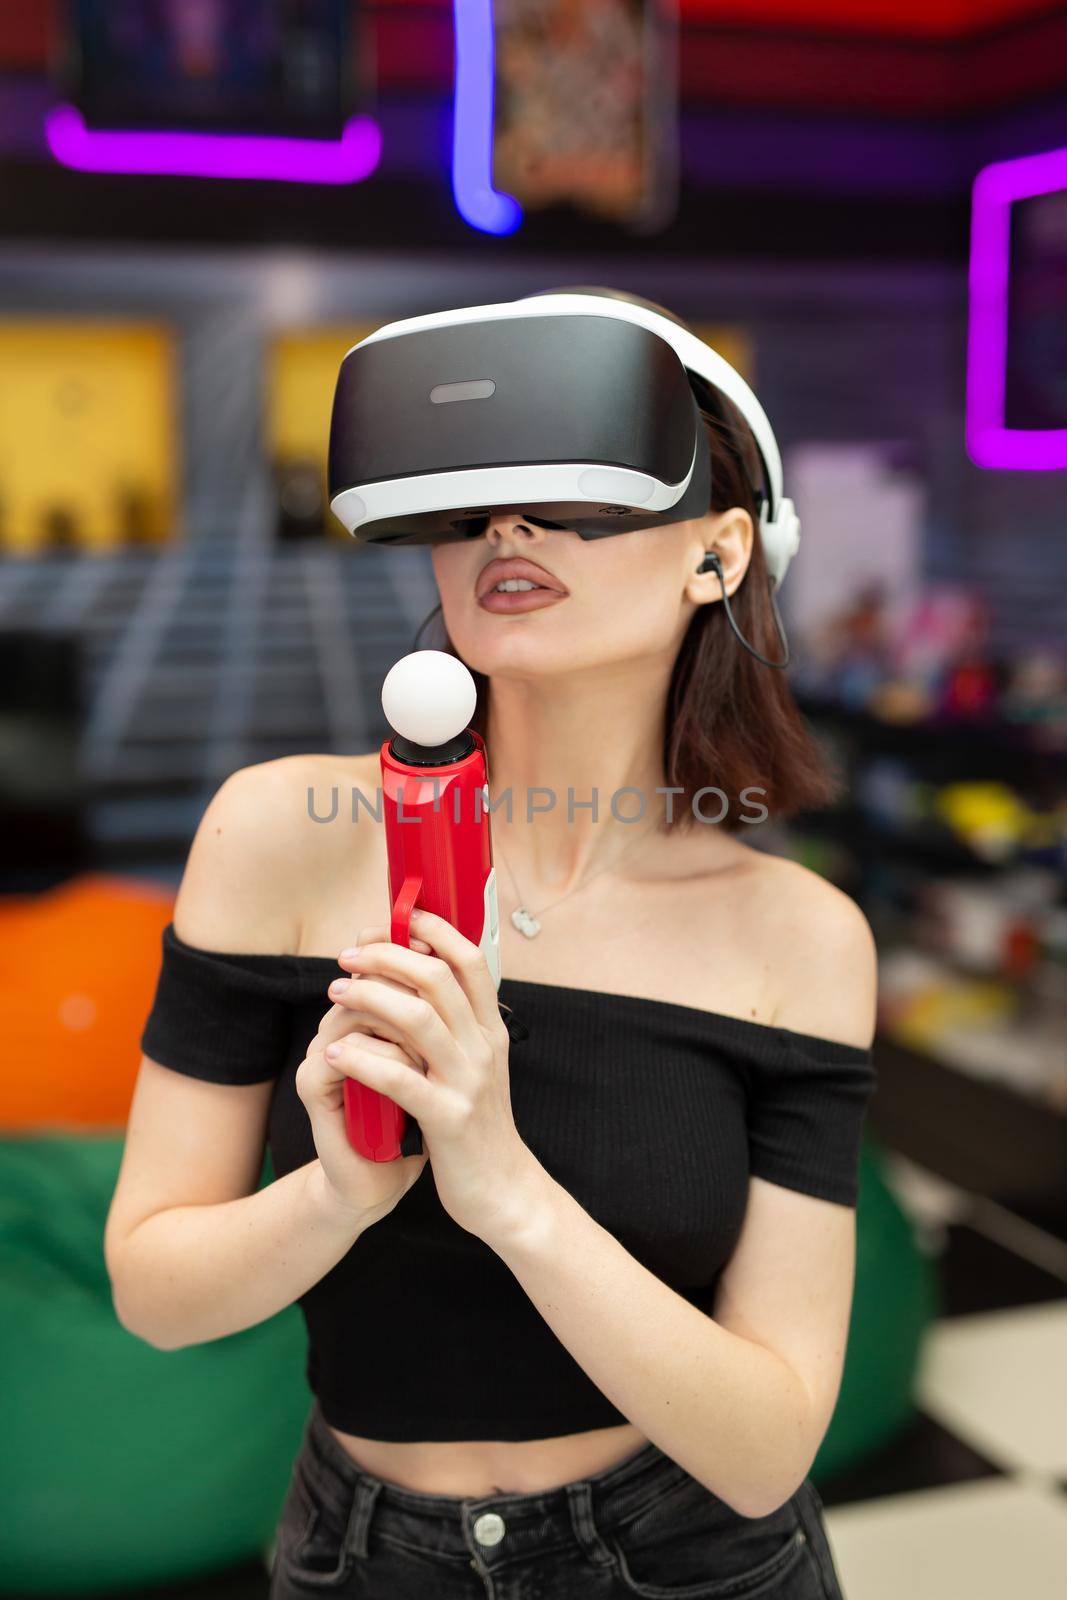 Young woman plays on a video games console, an emotional gamer shoots a game using a gun controller in a game club. VR. by StudioPeace